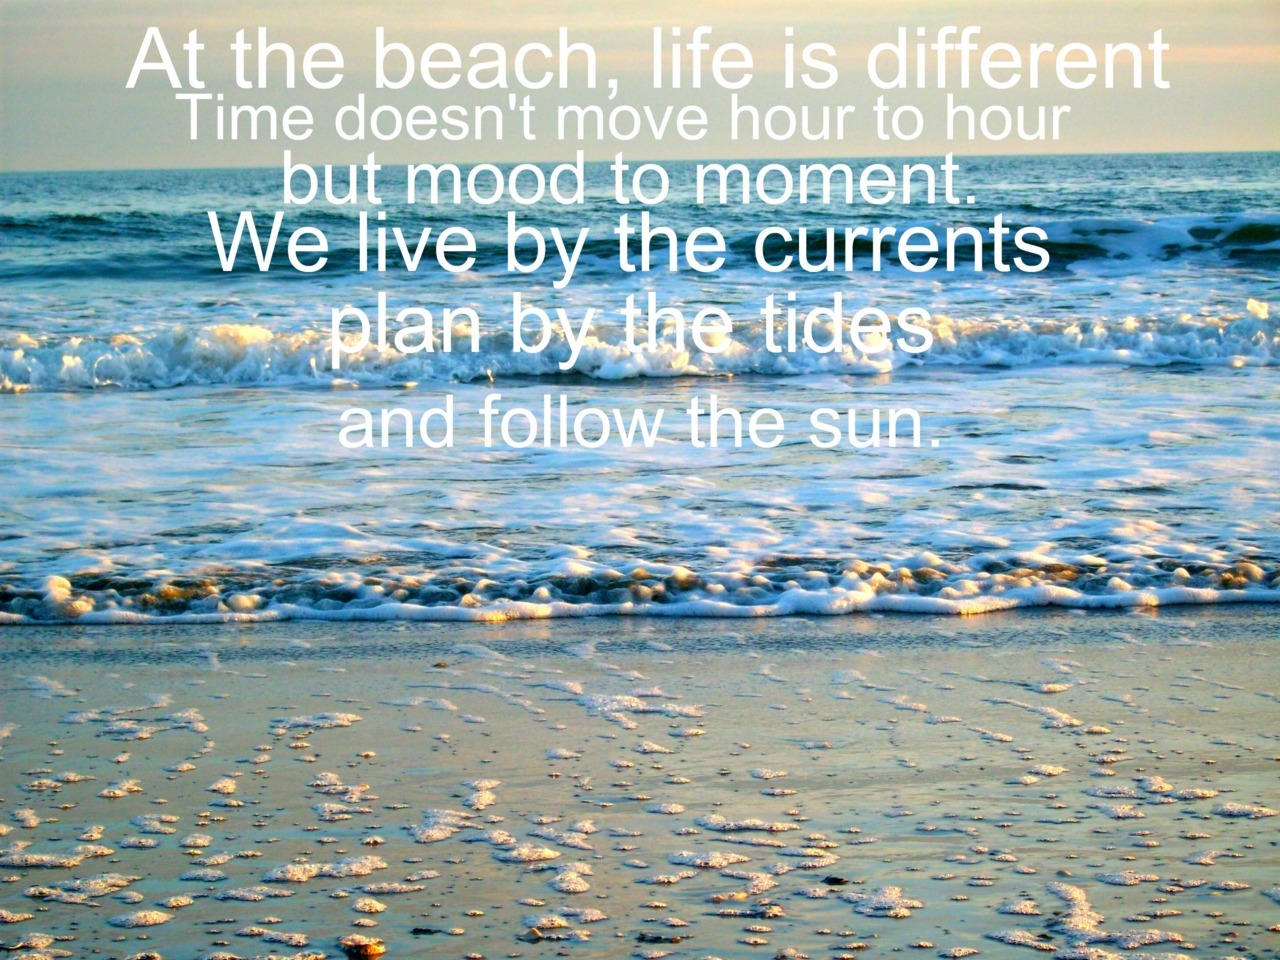 Beach Life Quotes And Saying. QuotesGram